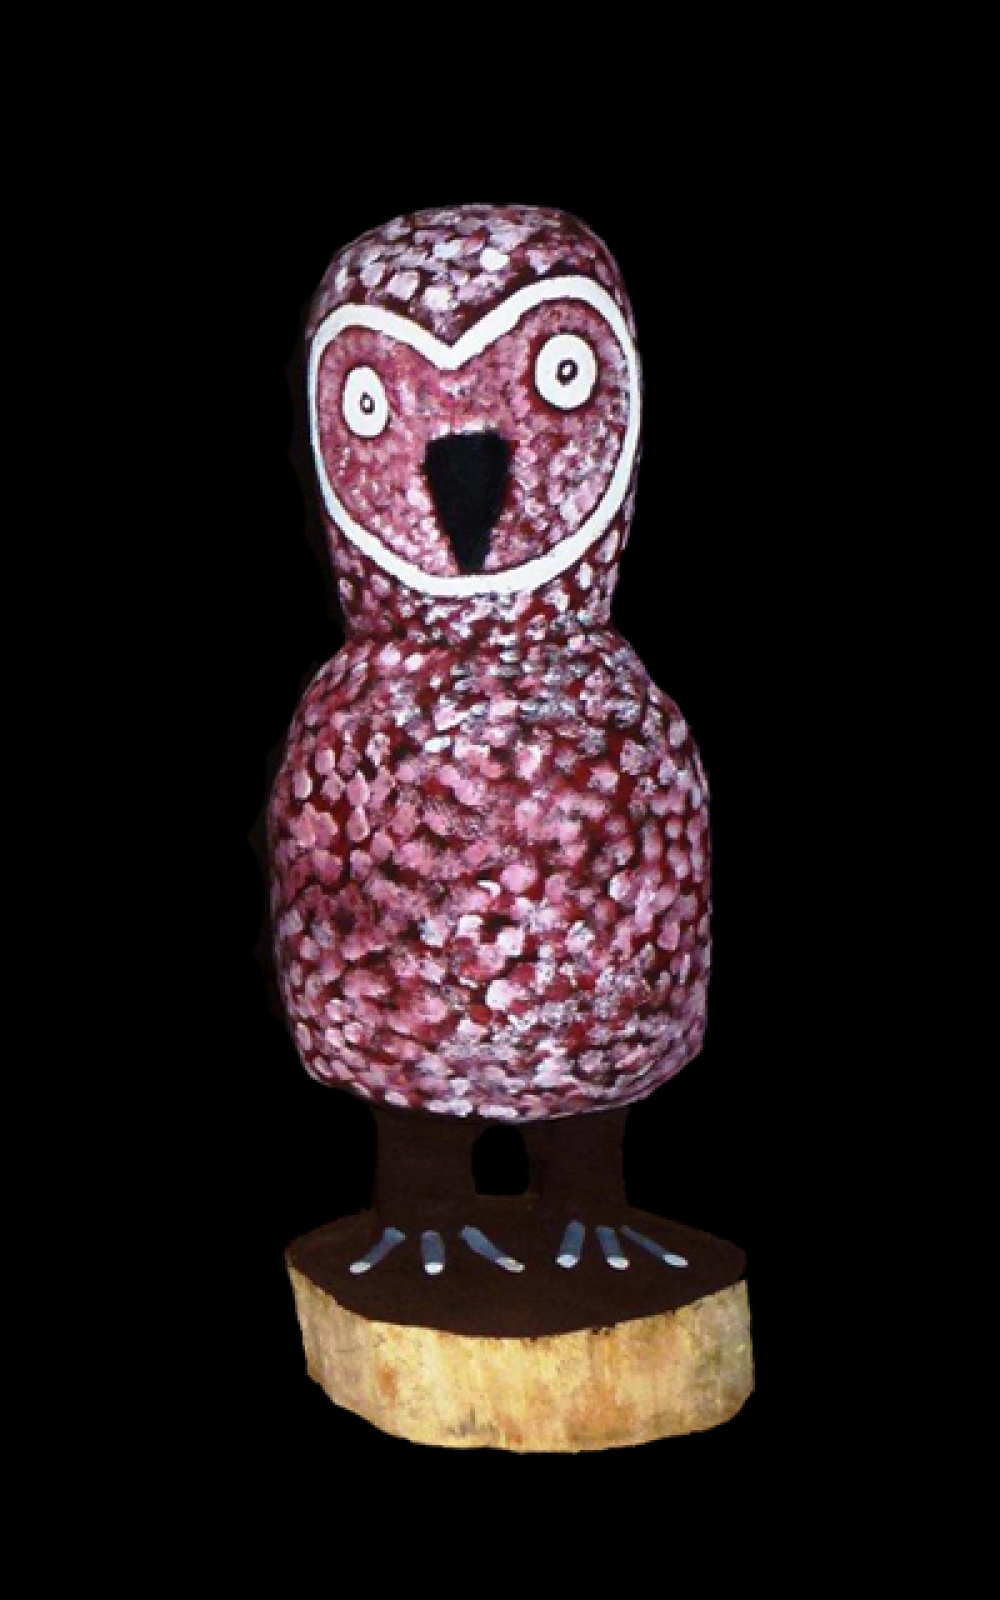 Owl (52cm)Wally Pwerle Clark is a senior Utopian artist and brother to Cowboy Louis Pwerle. His works are held in numerous collections including the National Gallery of Victoria and Powerhouse Museum in Sydney. Wally carves (typically mulga and bean woods) using a tomahawk